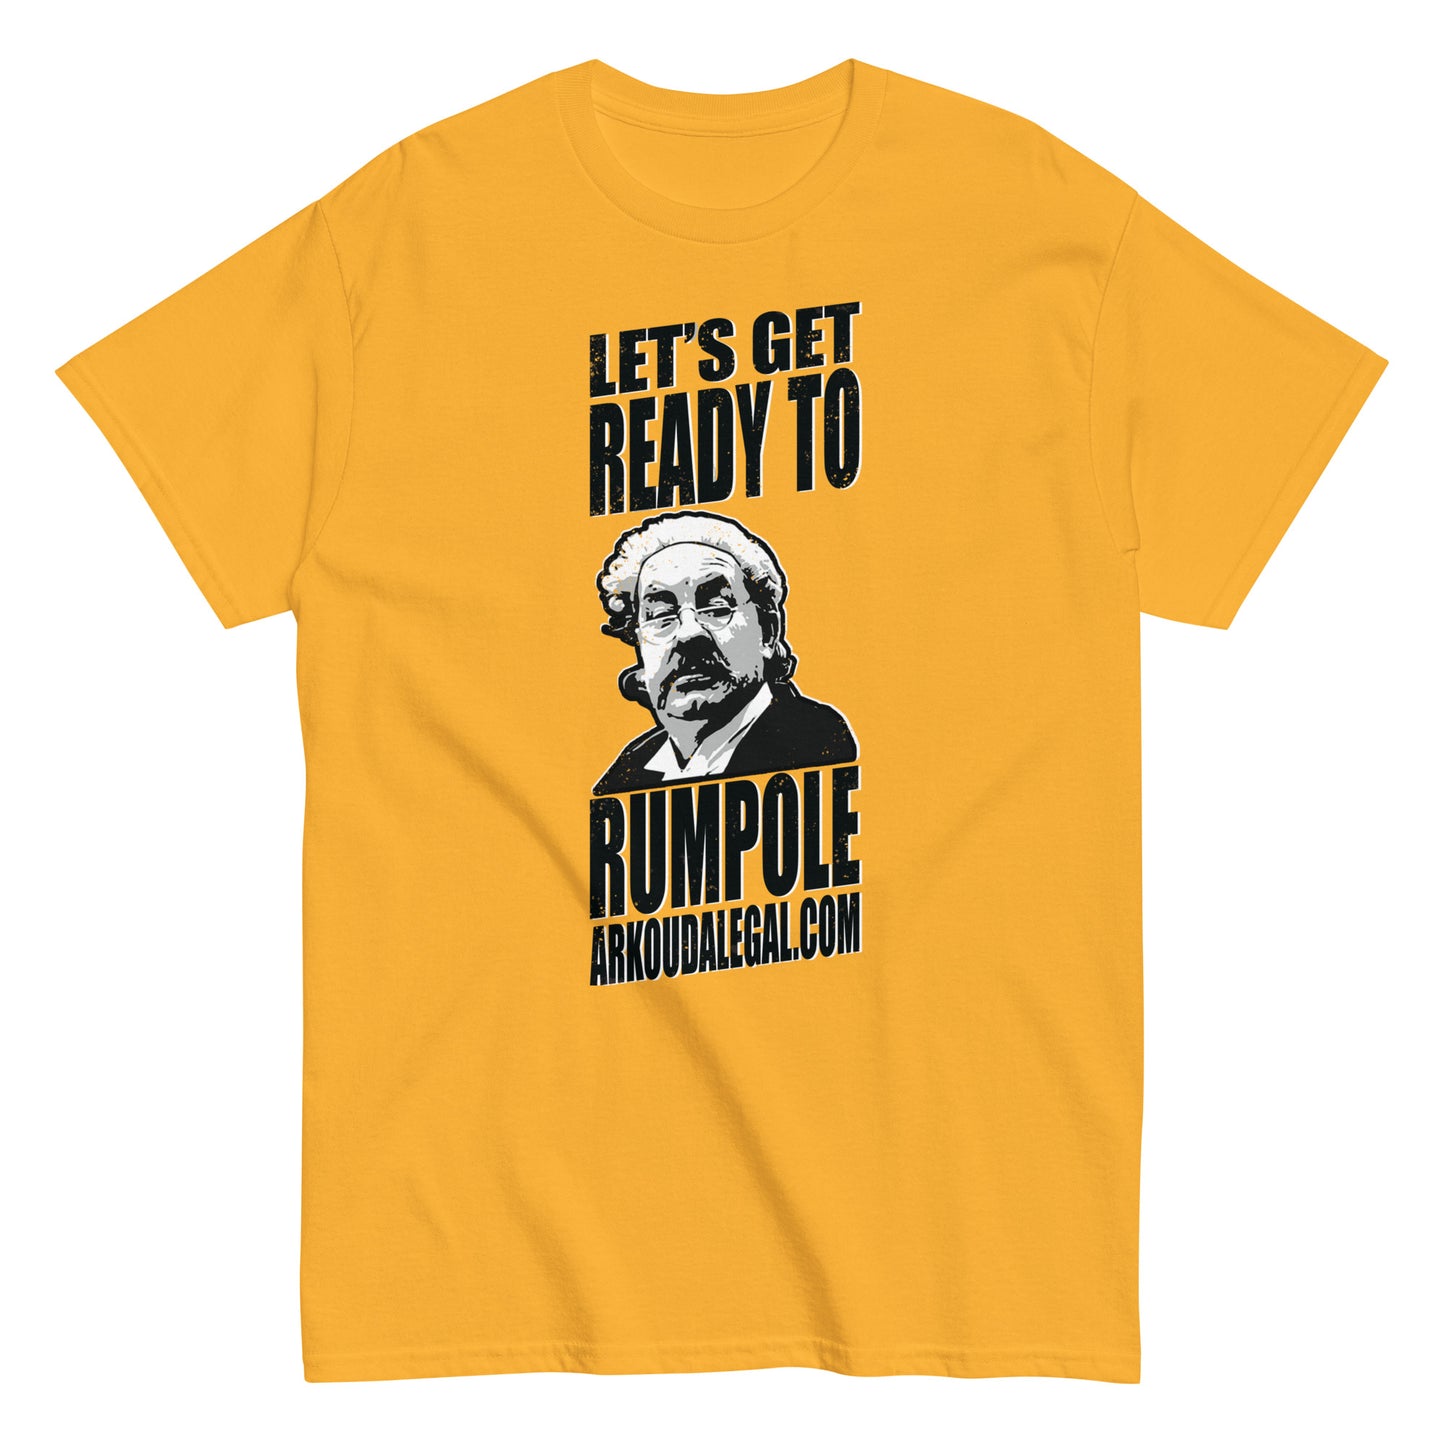 ArkoudaLegal - Let's Get Ready to Rumpole! - Men's classic tee